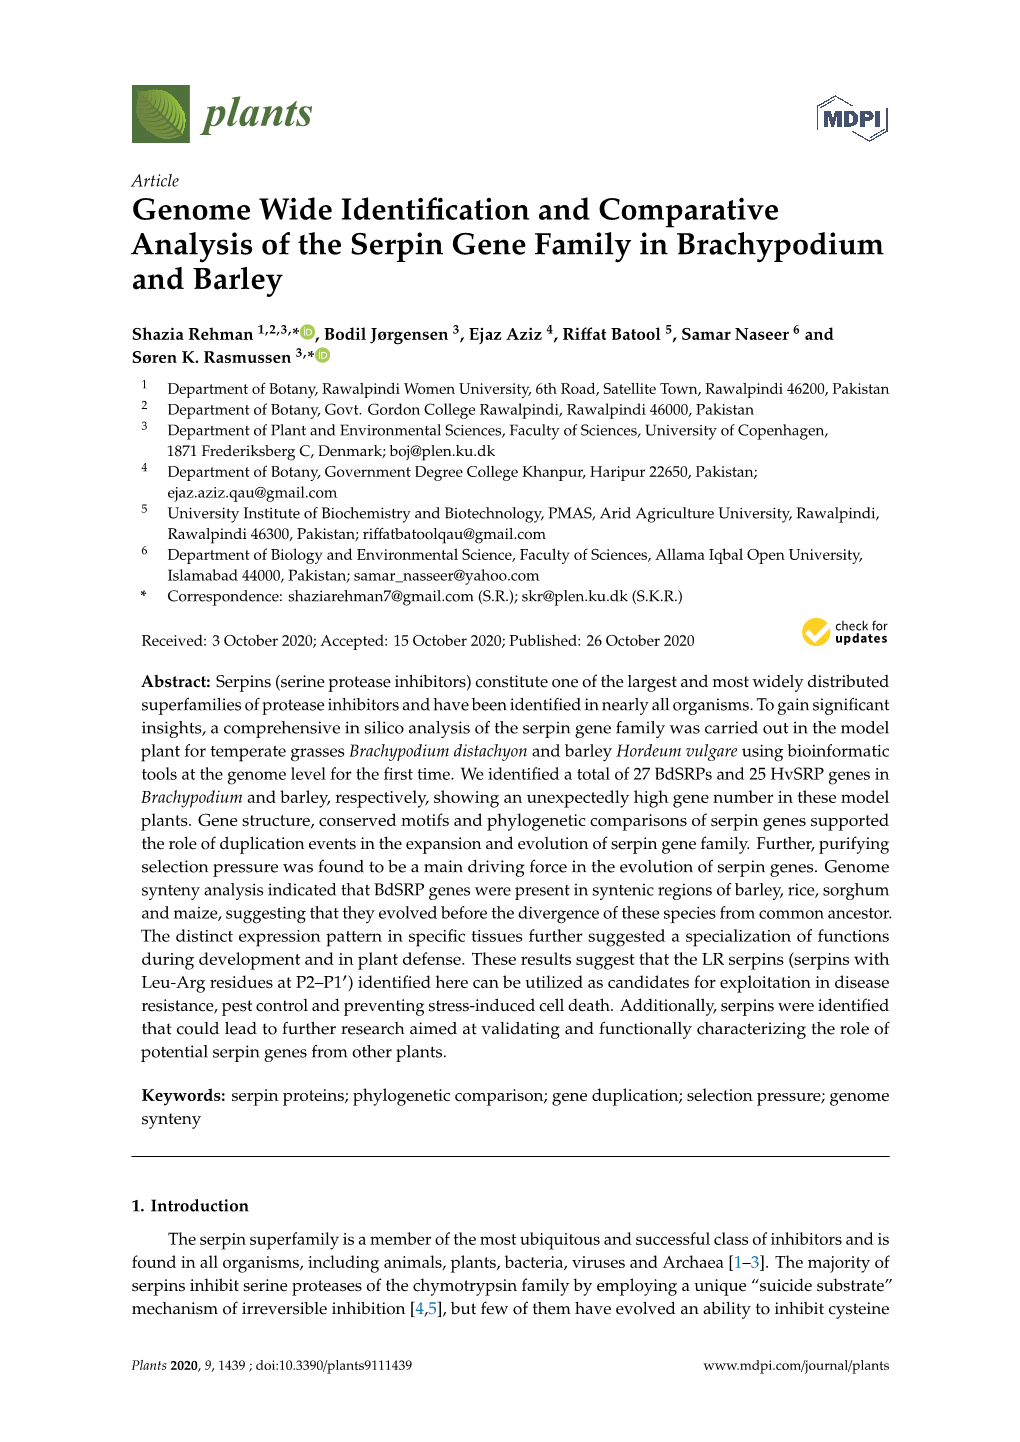 Genome Wide Identification and Comparative Analysis of the Serpin